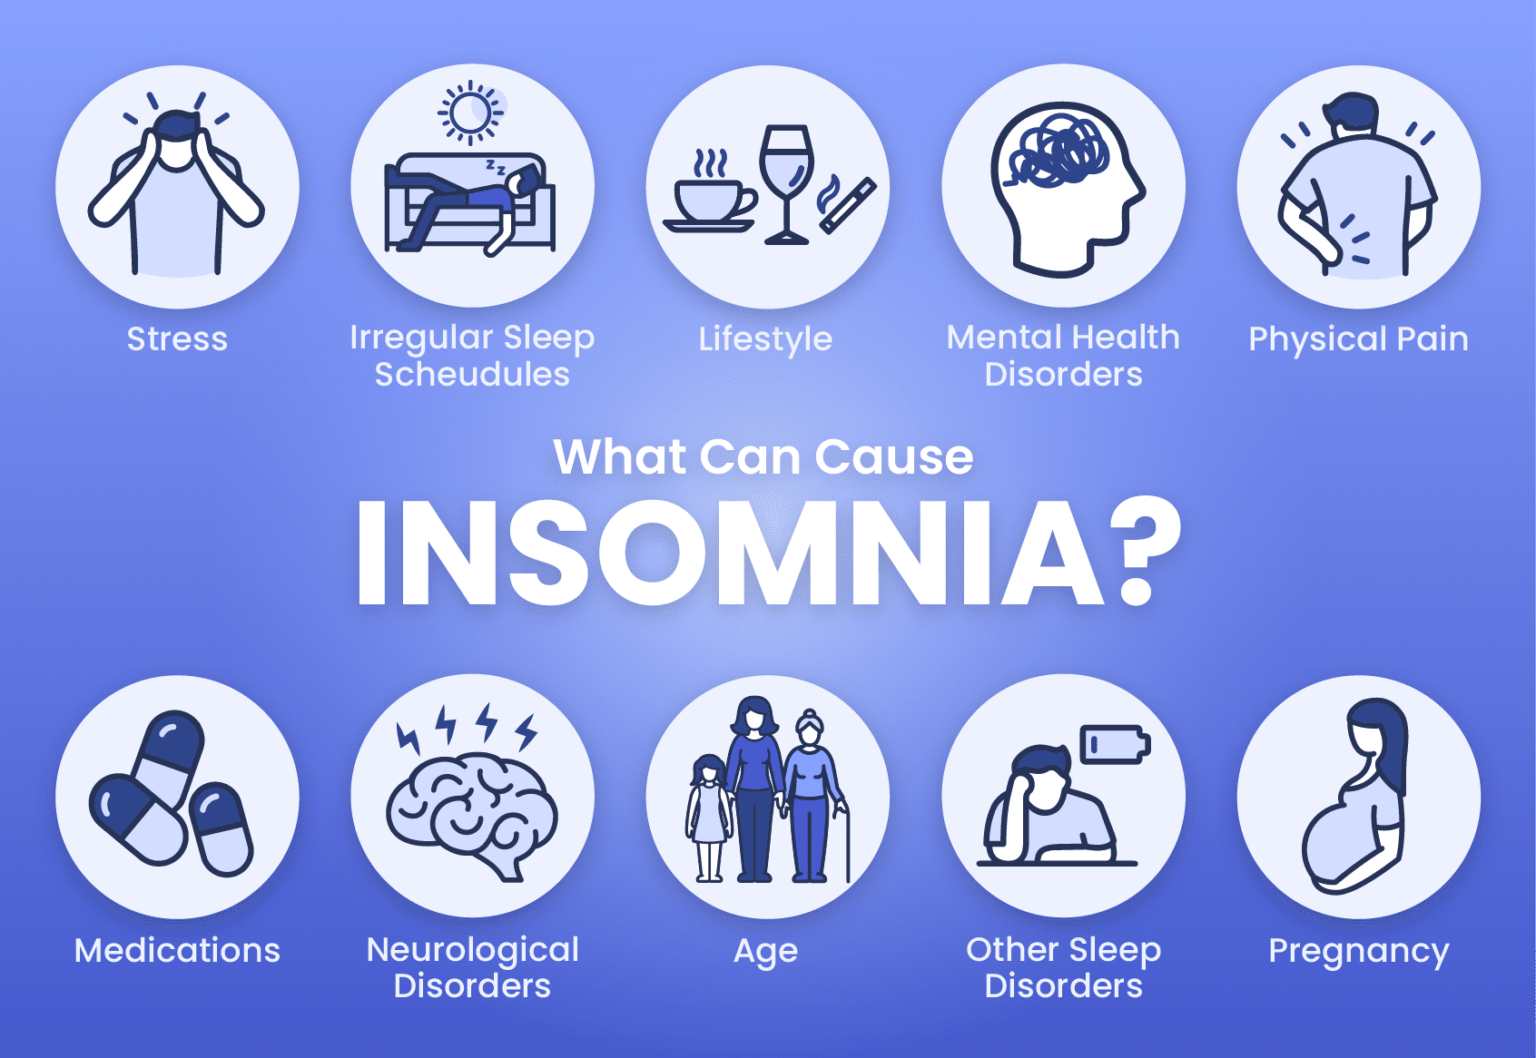 insomnia research article